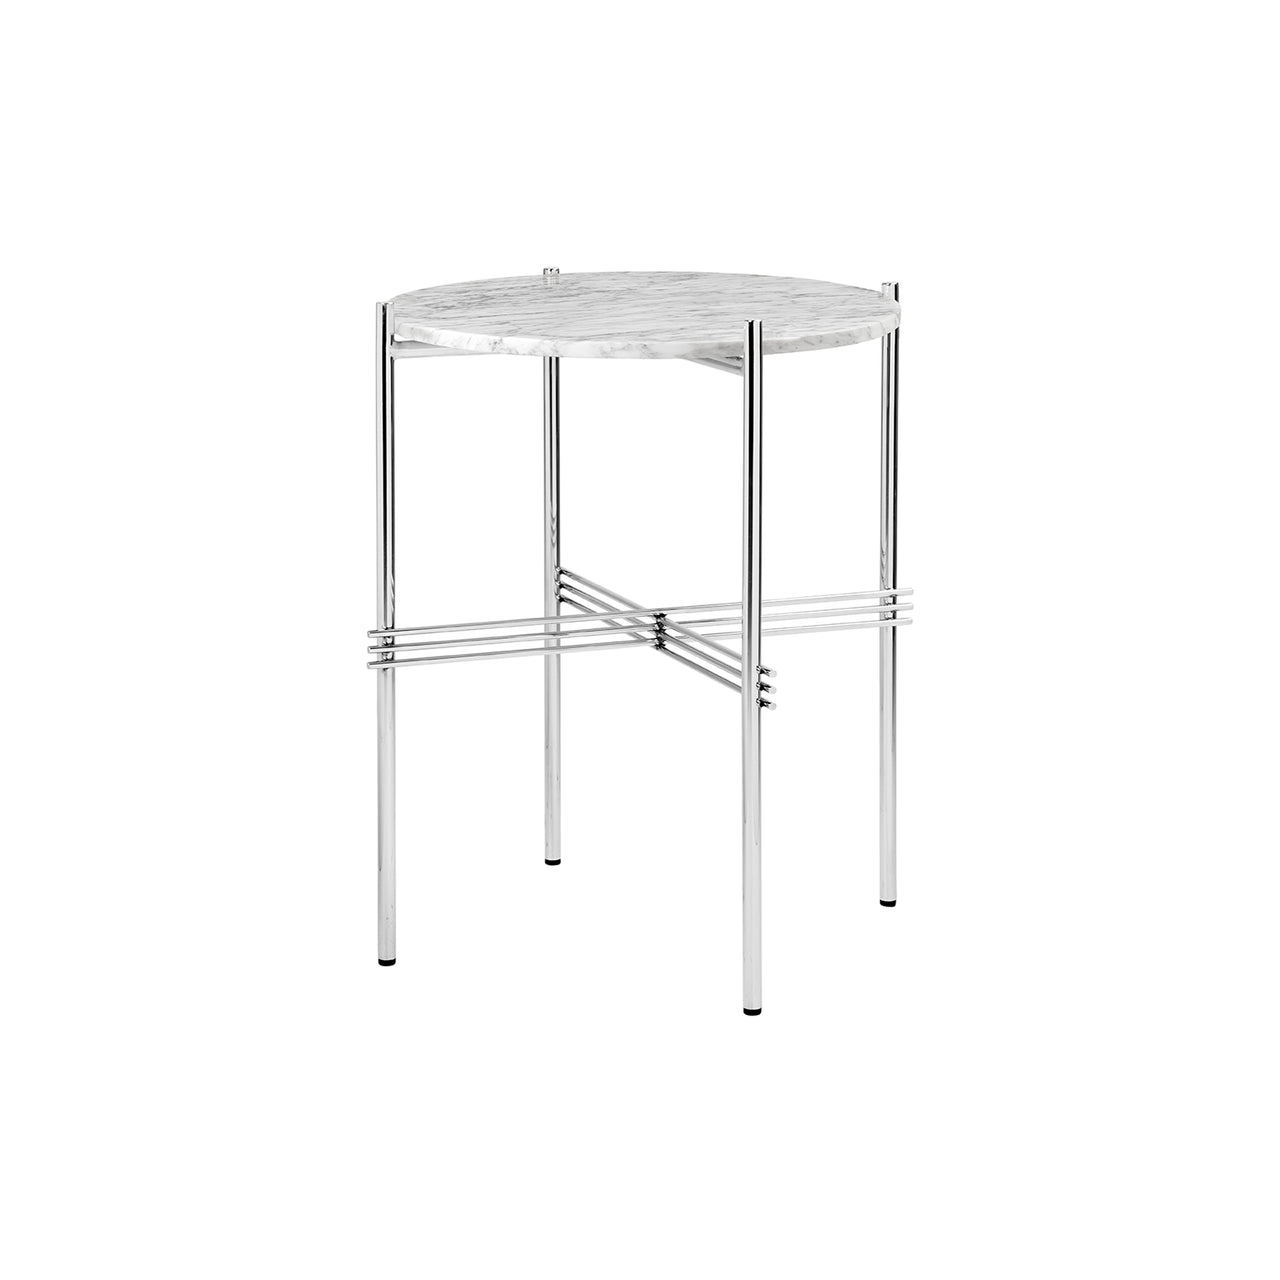 TS Round Side Table: Polished Steel + White Carrara Marble